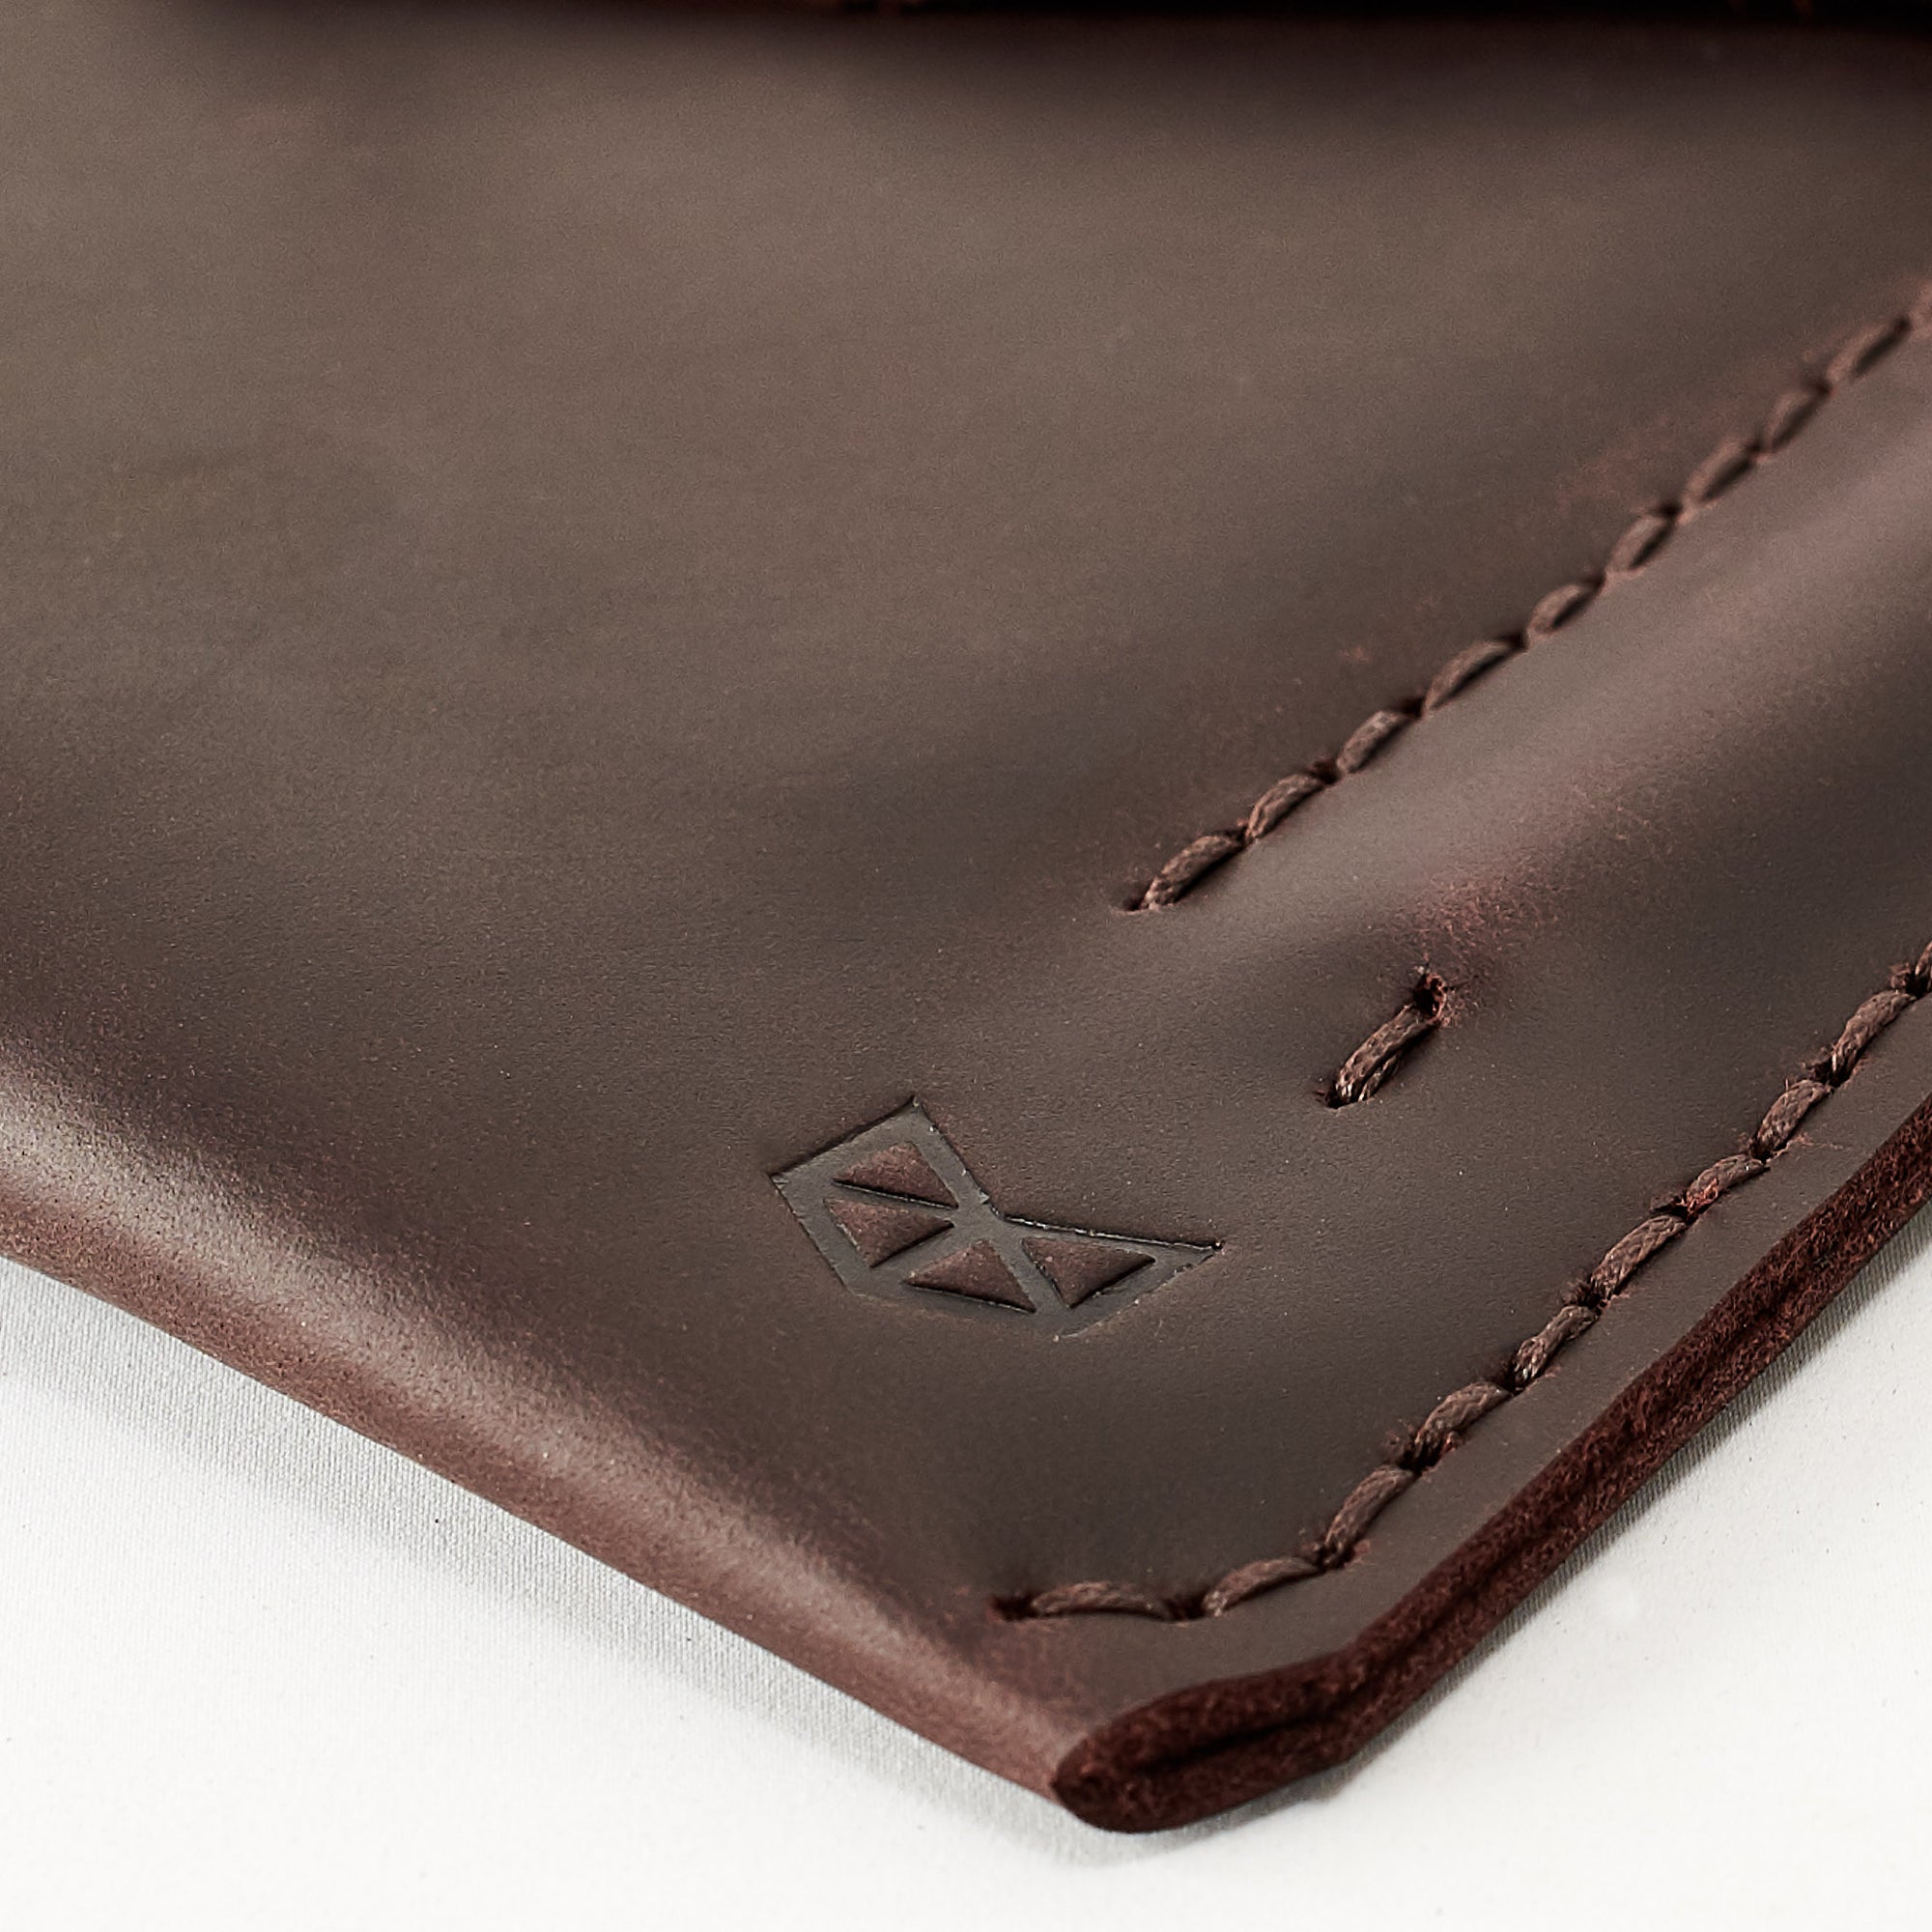 Hand stitch. Dark brown handcrafted leather reMarkable tablet case. Folio with Marker holder. Paper E-ink tablet minimalist sleeve design. 